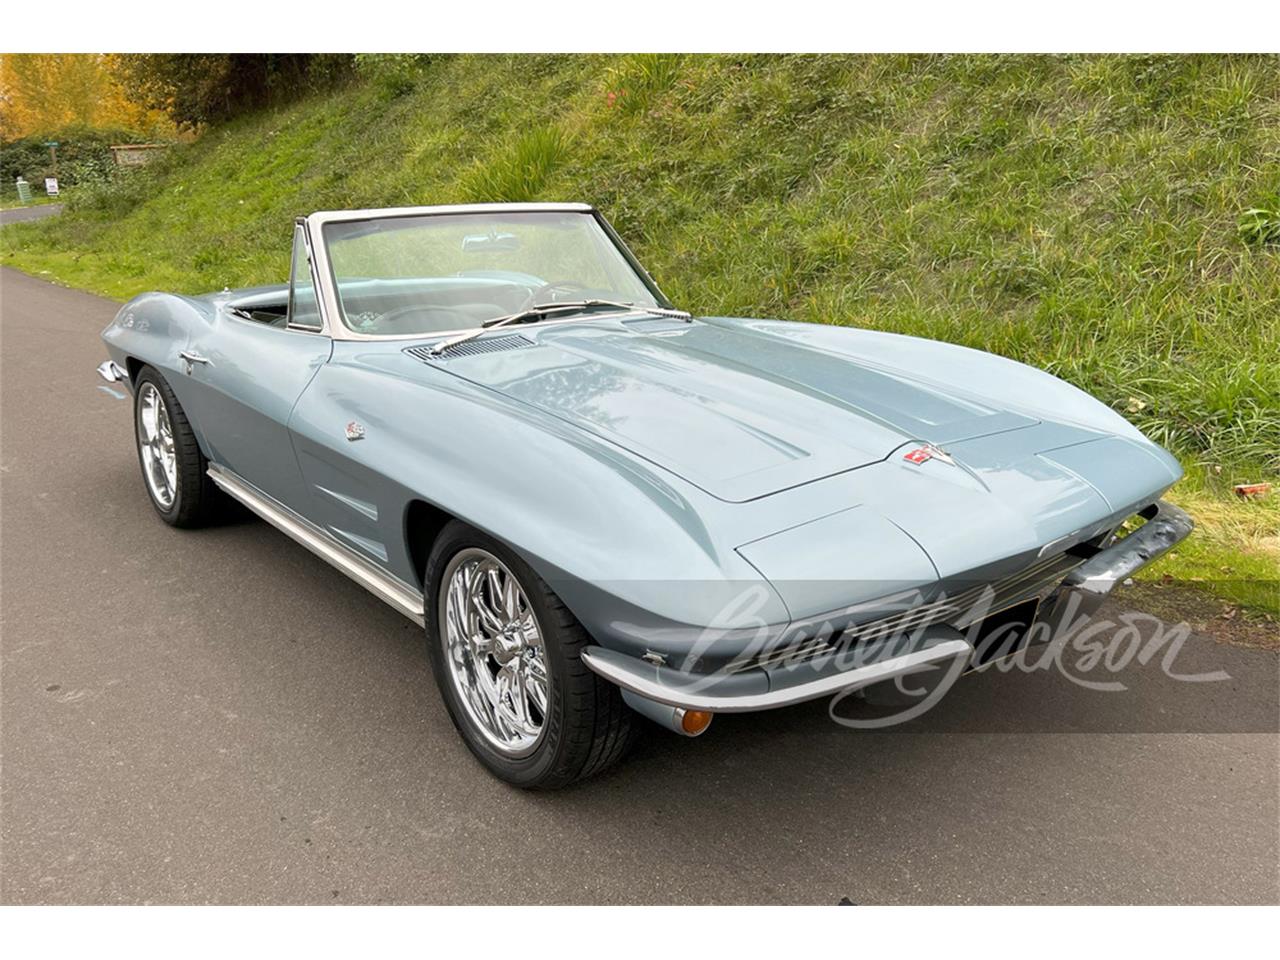 For Sale at Auction: 1964 Chevrolet Corvette in Scottsdale, Arizona for sale in Scottsdale, AZ